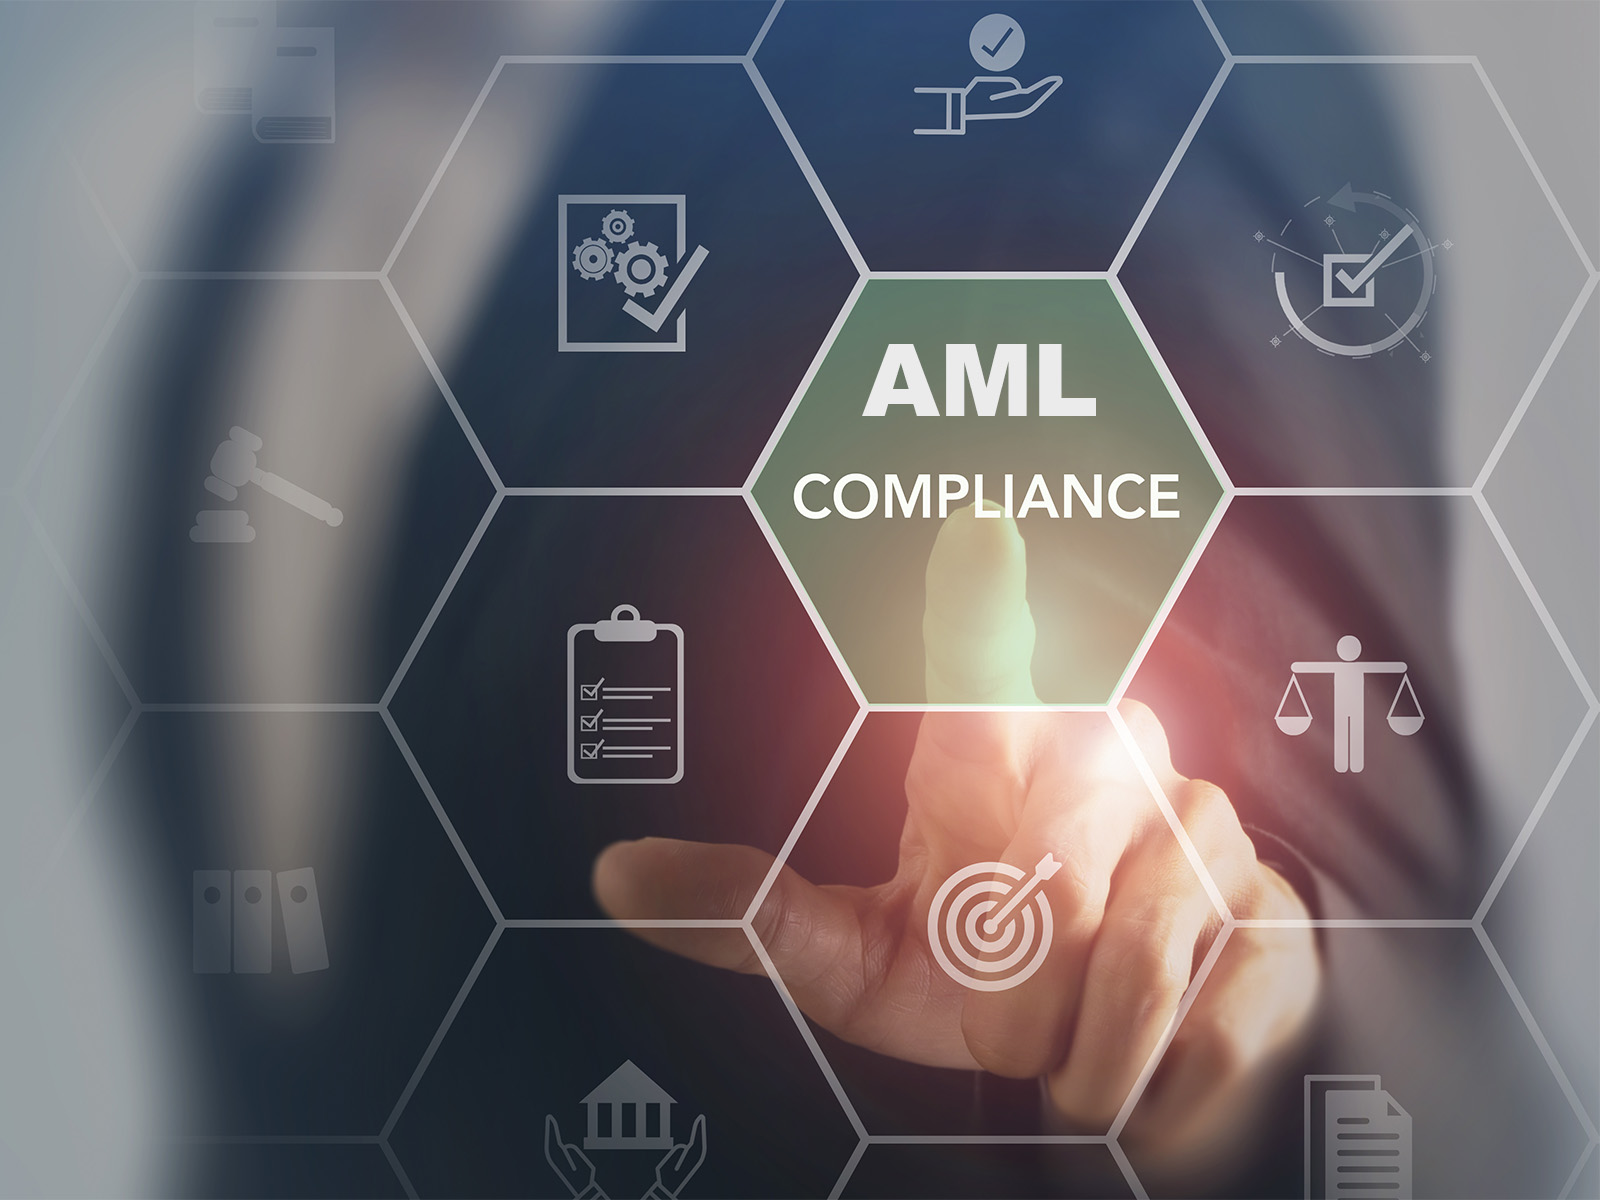 AML Compliance platform solution--Art shows a hexagon-filled field. Each hexagon has an icon related to AML Compliance (KYC CDD, screening, sanctions screening, onboarding, transaction monitoring, etc.). 